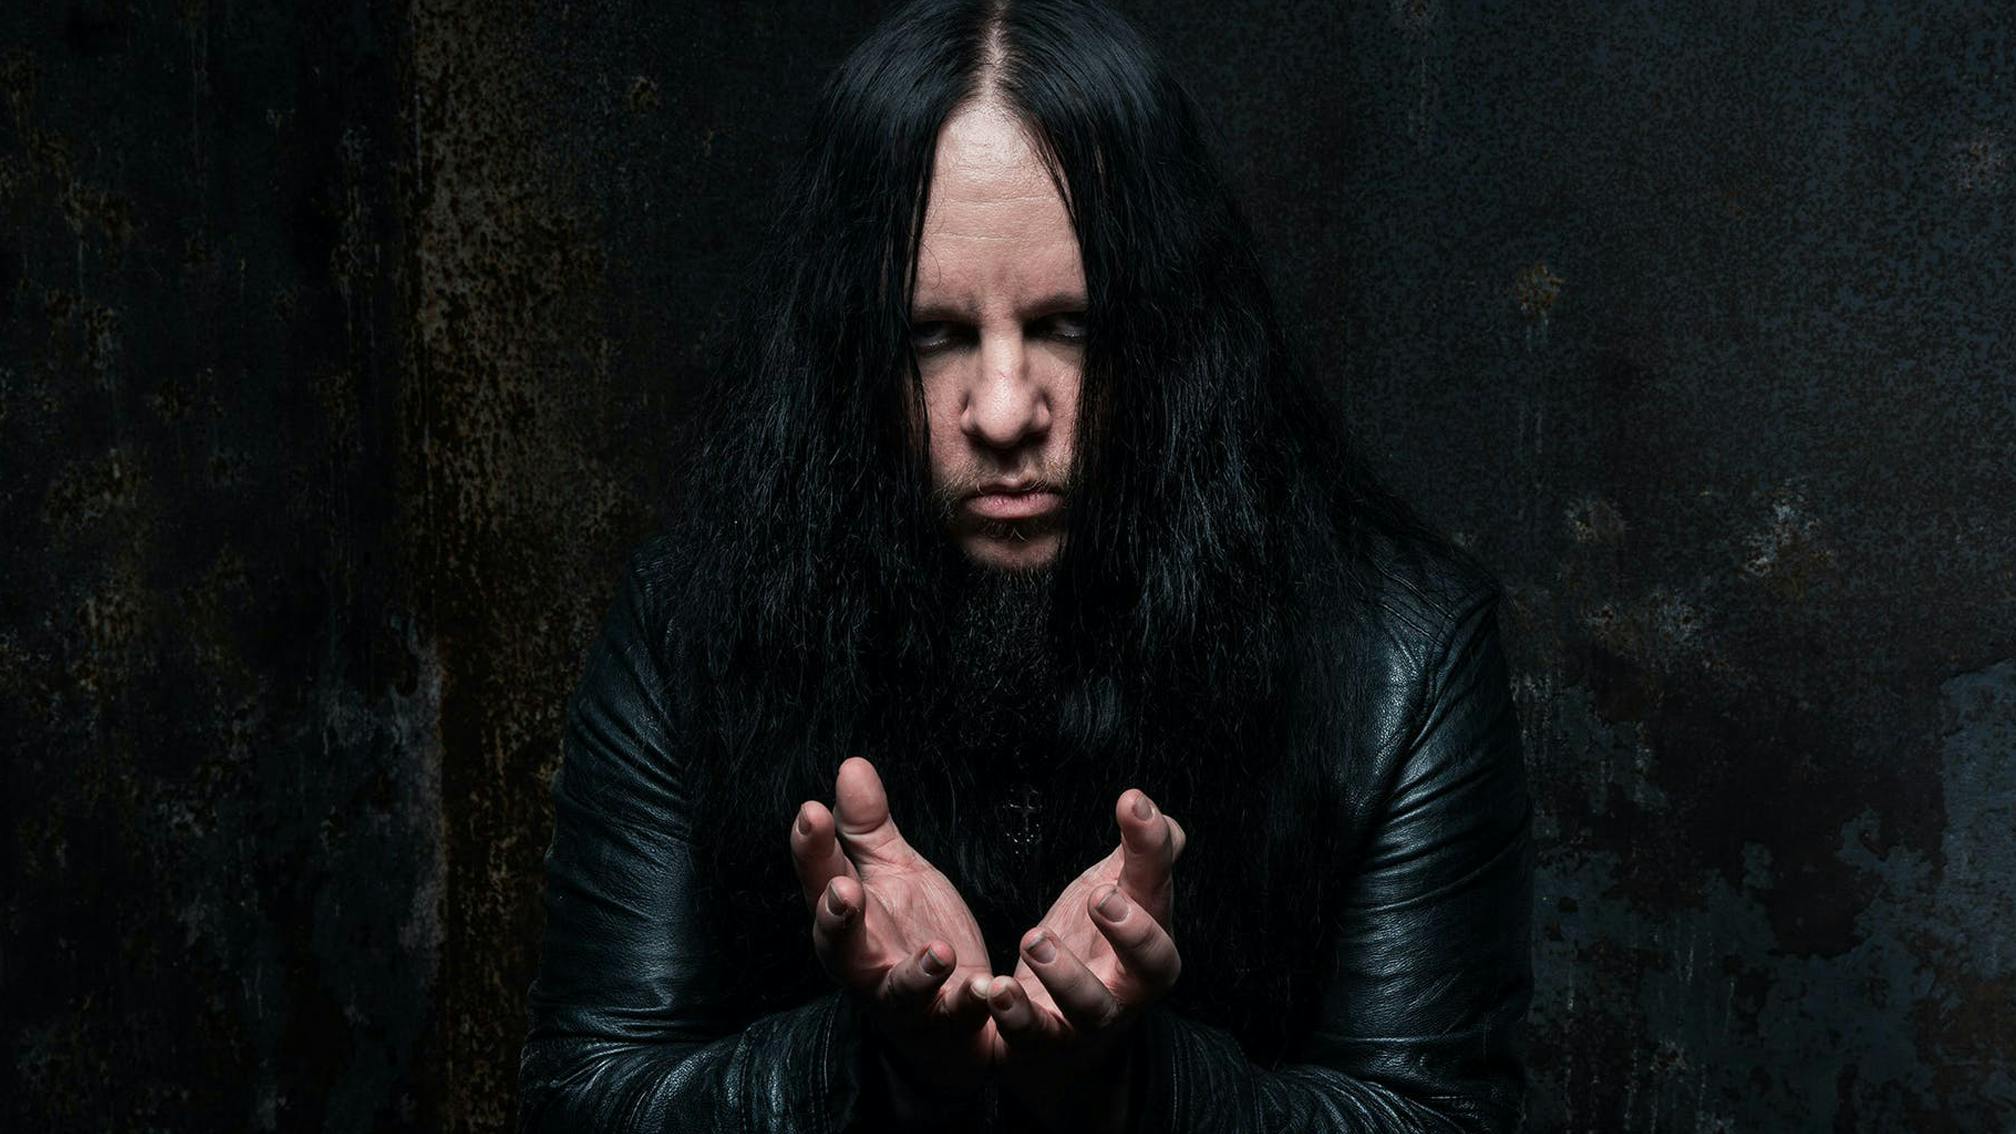 Joey Jordison: “Every time I go onstage and get behind the kit, it’s a gift”